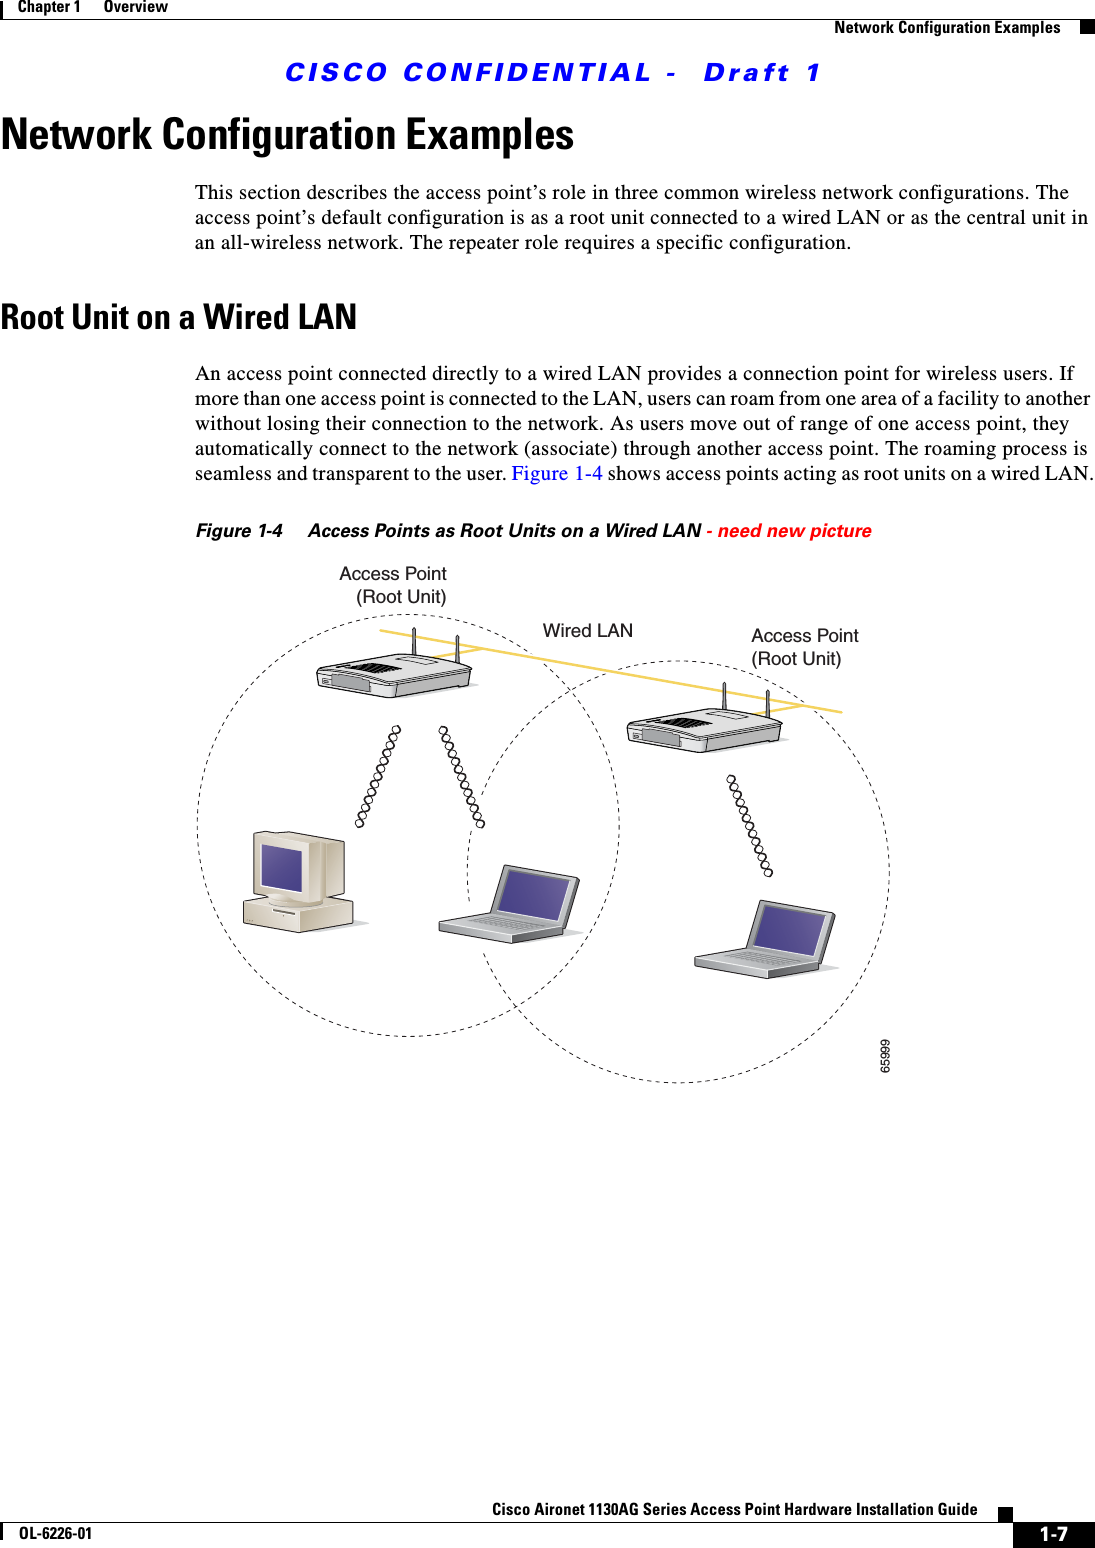  CISCO CONFIDENTIAL -  Draft 11-7Cisco Aironet 1130AG Series Access Point Hardware Installation GuideOL-6226-01Chapter 1      OverviewNetwork Configuration ExamplesNetwork Configuration ExamplesThis section describes the access point’s role in three common wireless network configurations. The access point’s default configuration is as a root unit connected to a wired LAN or as the central unit in an all-wireless network. The repeater role requires a specific configuration.Root Unit on a Wired LANAn access point connected directly to a wired LAN provides a connection point for wireless users. If more than one access point is connected to the LAN, users can roam from one area of a facility to another without losing their connection to the network. As users move out of range of one access point, they automatically connect to the network (associate) through another access point. The roaming process is seamless and transparent to the user. Figure 1-4 shows access points acting as root units on a wired LAN.Figure 1-4 Access Points as Root Units on a Wired LAN - need new picture Access Point(Root Unit)Access Point(Root Unit)65999Wired LAN